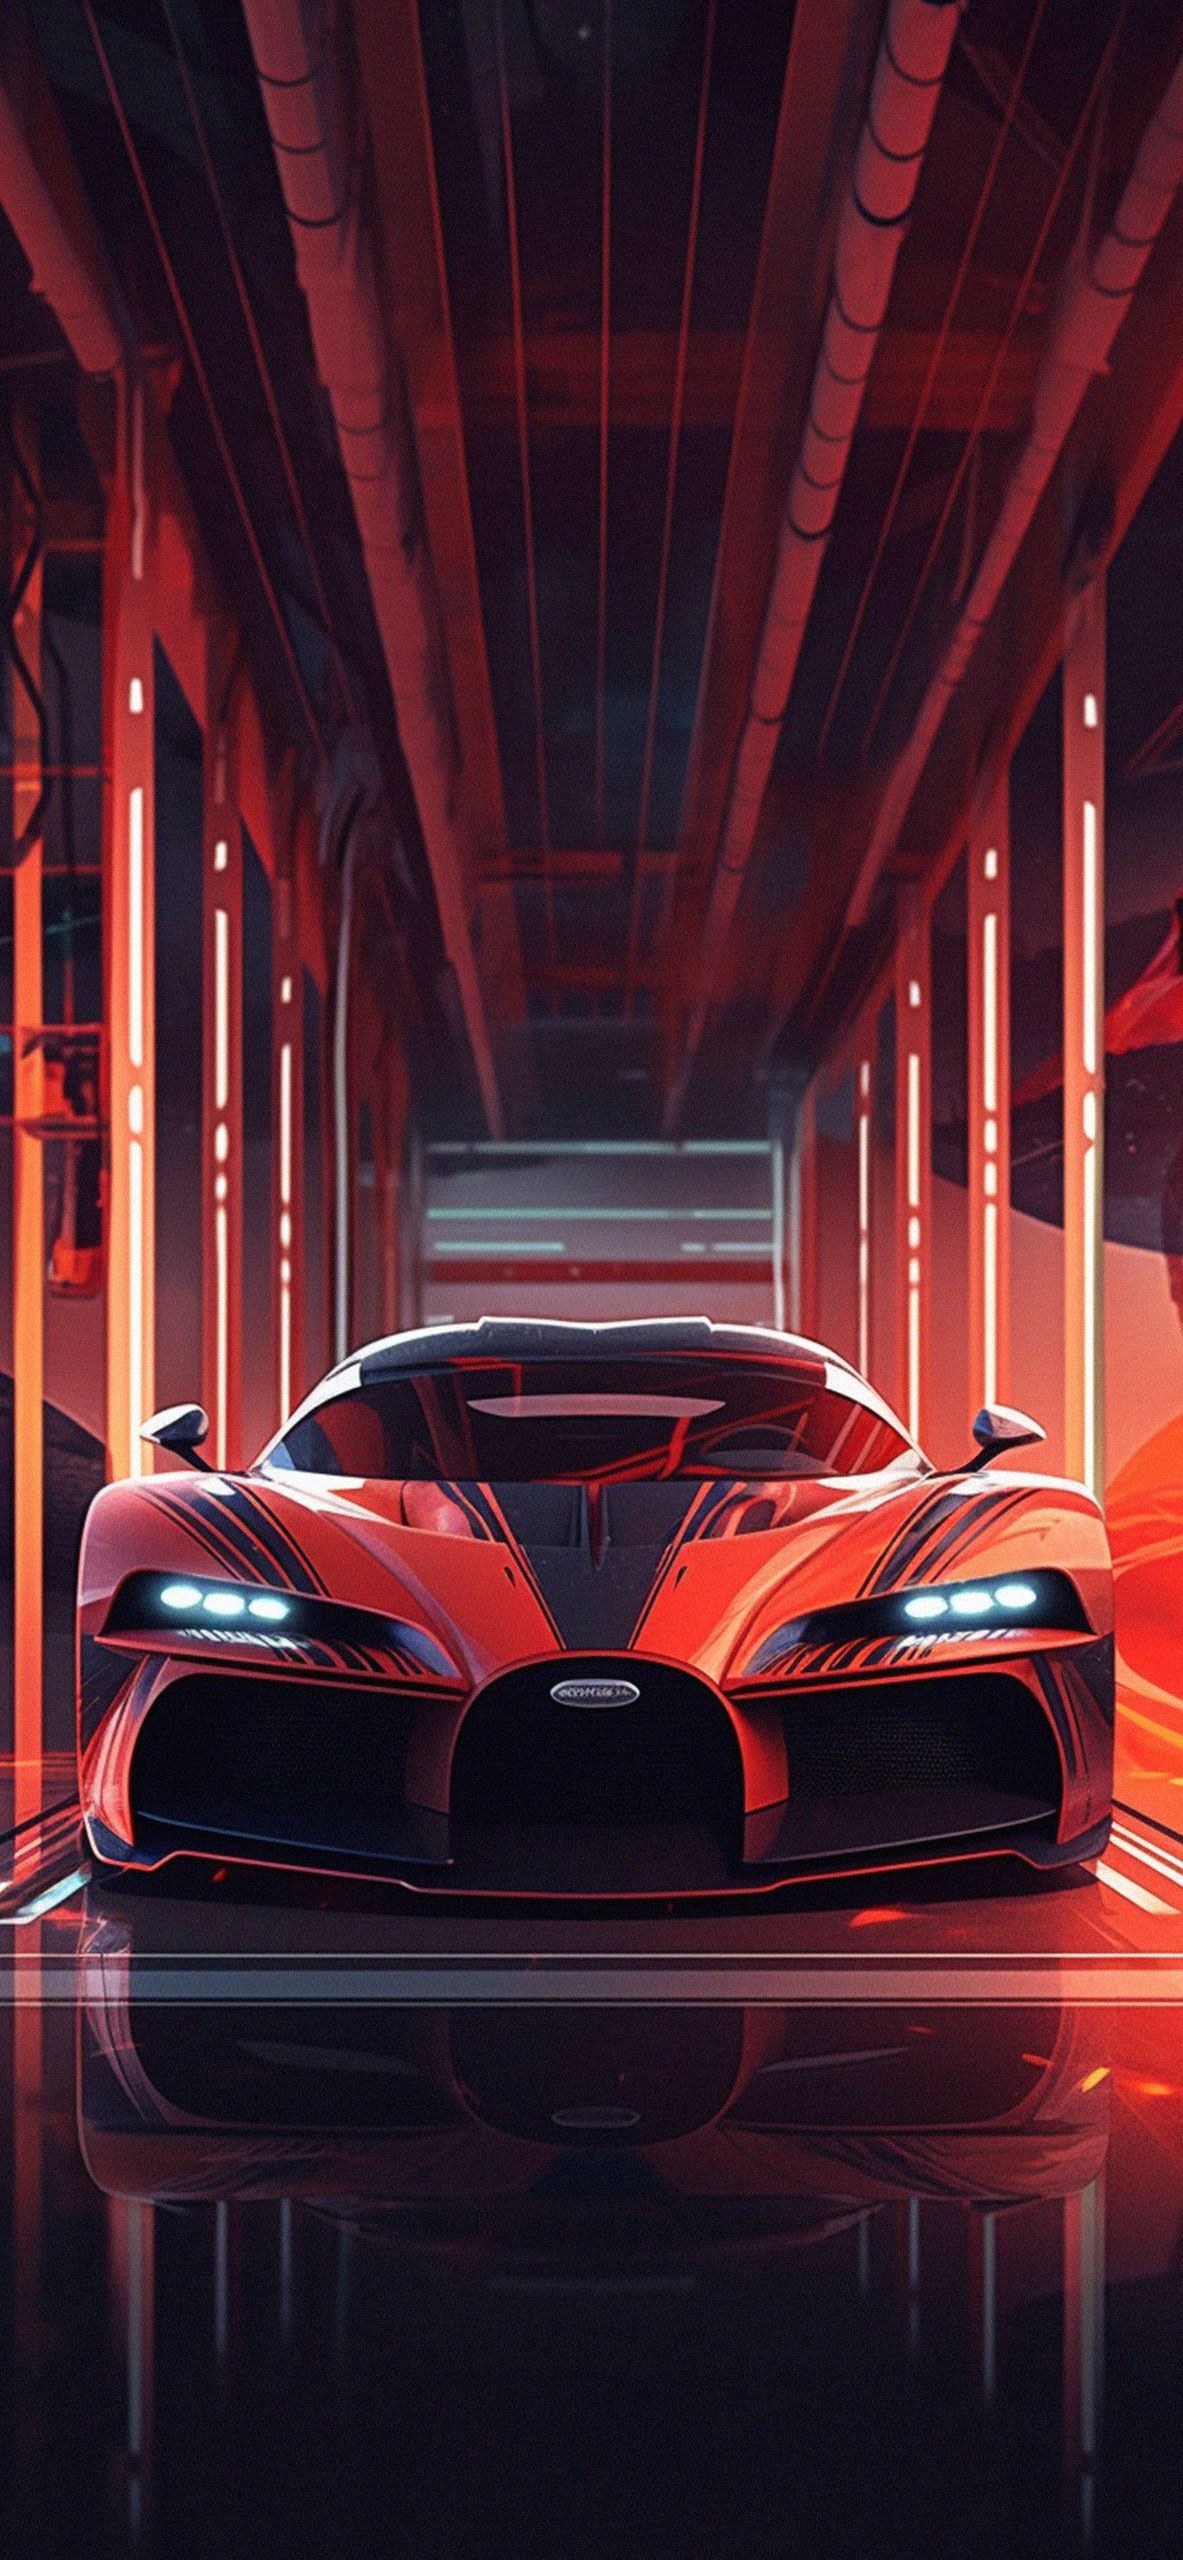 Bugatti car in a red tunnel wallpaper - Cars, Android